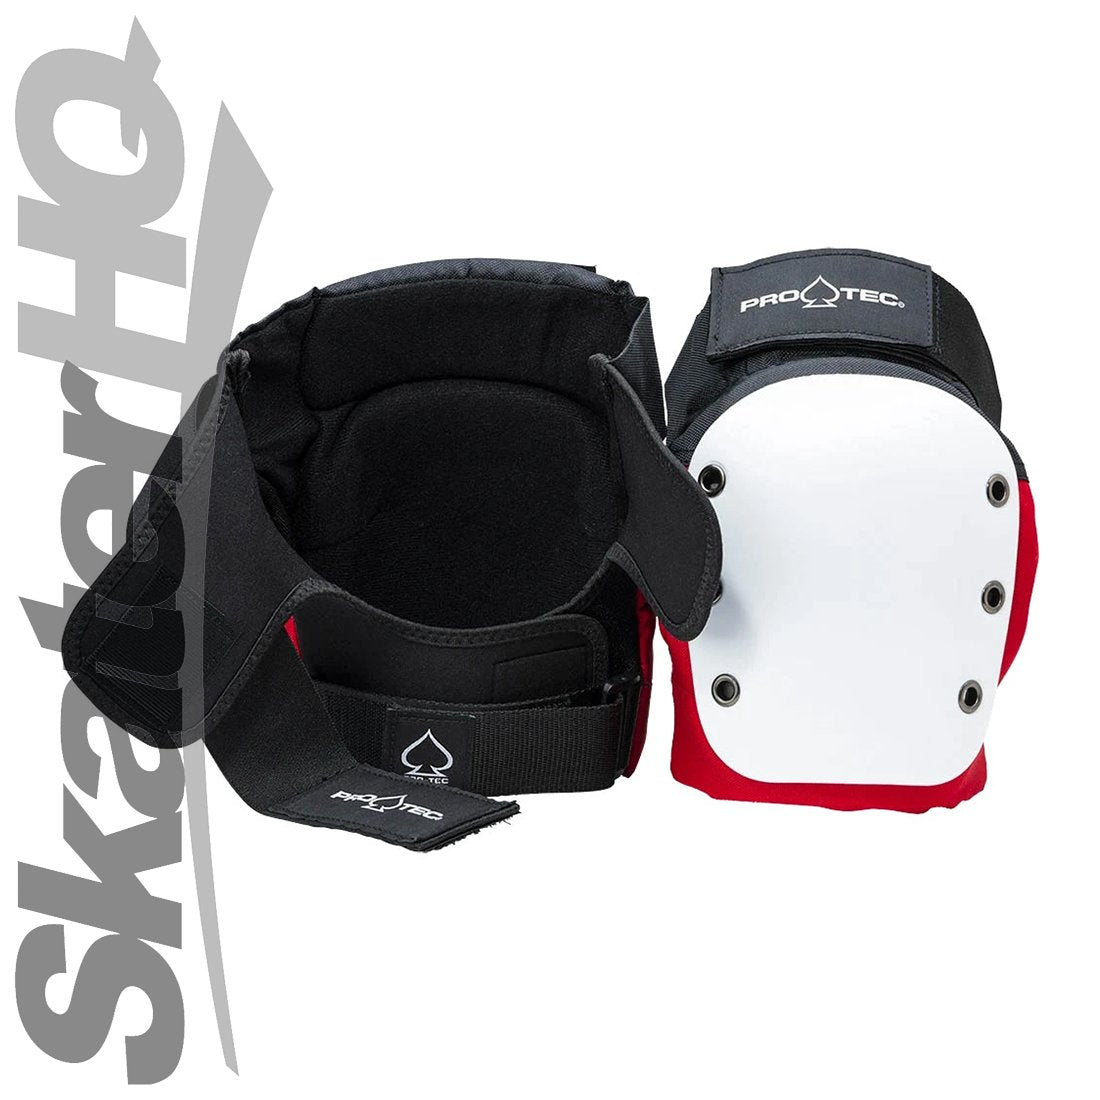 Pro-Tec Street Knee - Red/White/Black Protective Gear